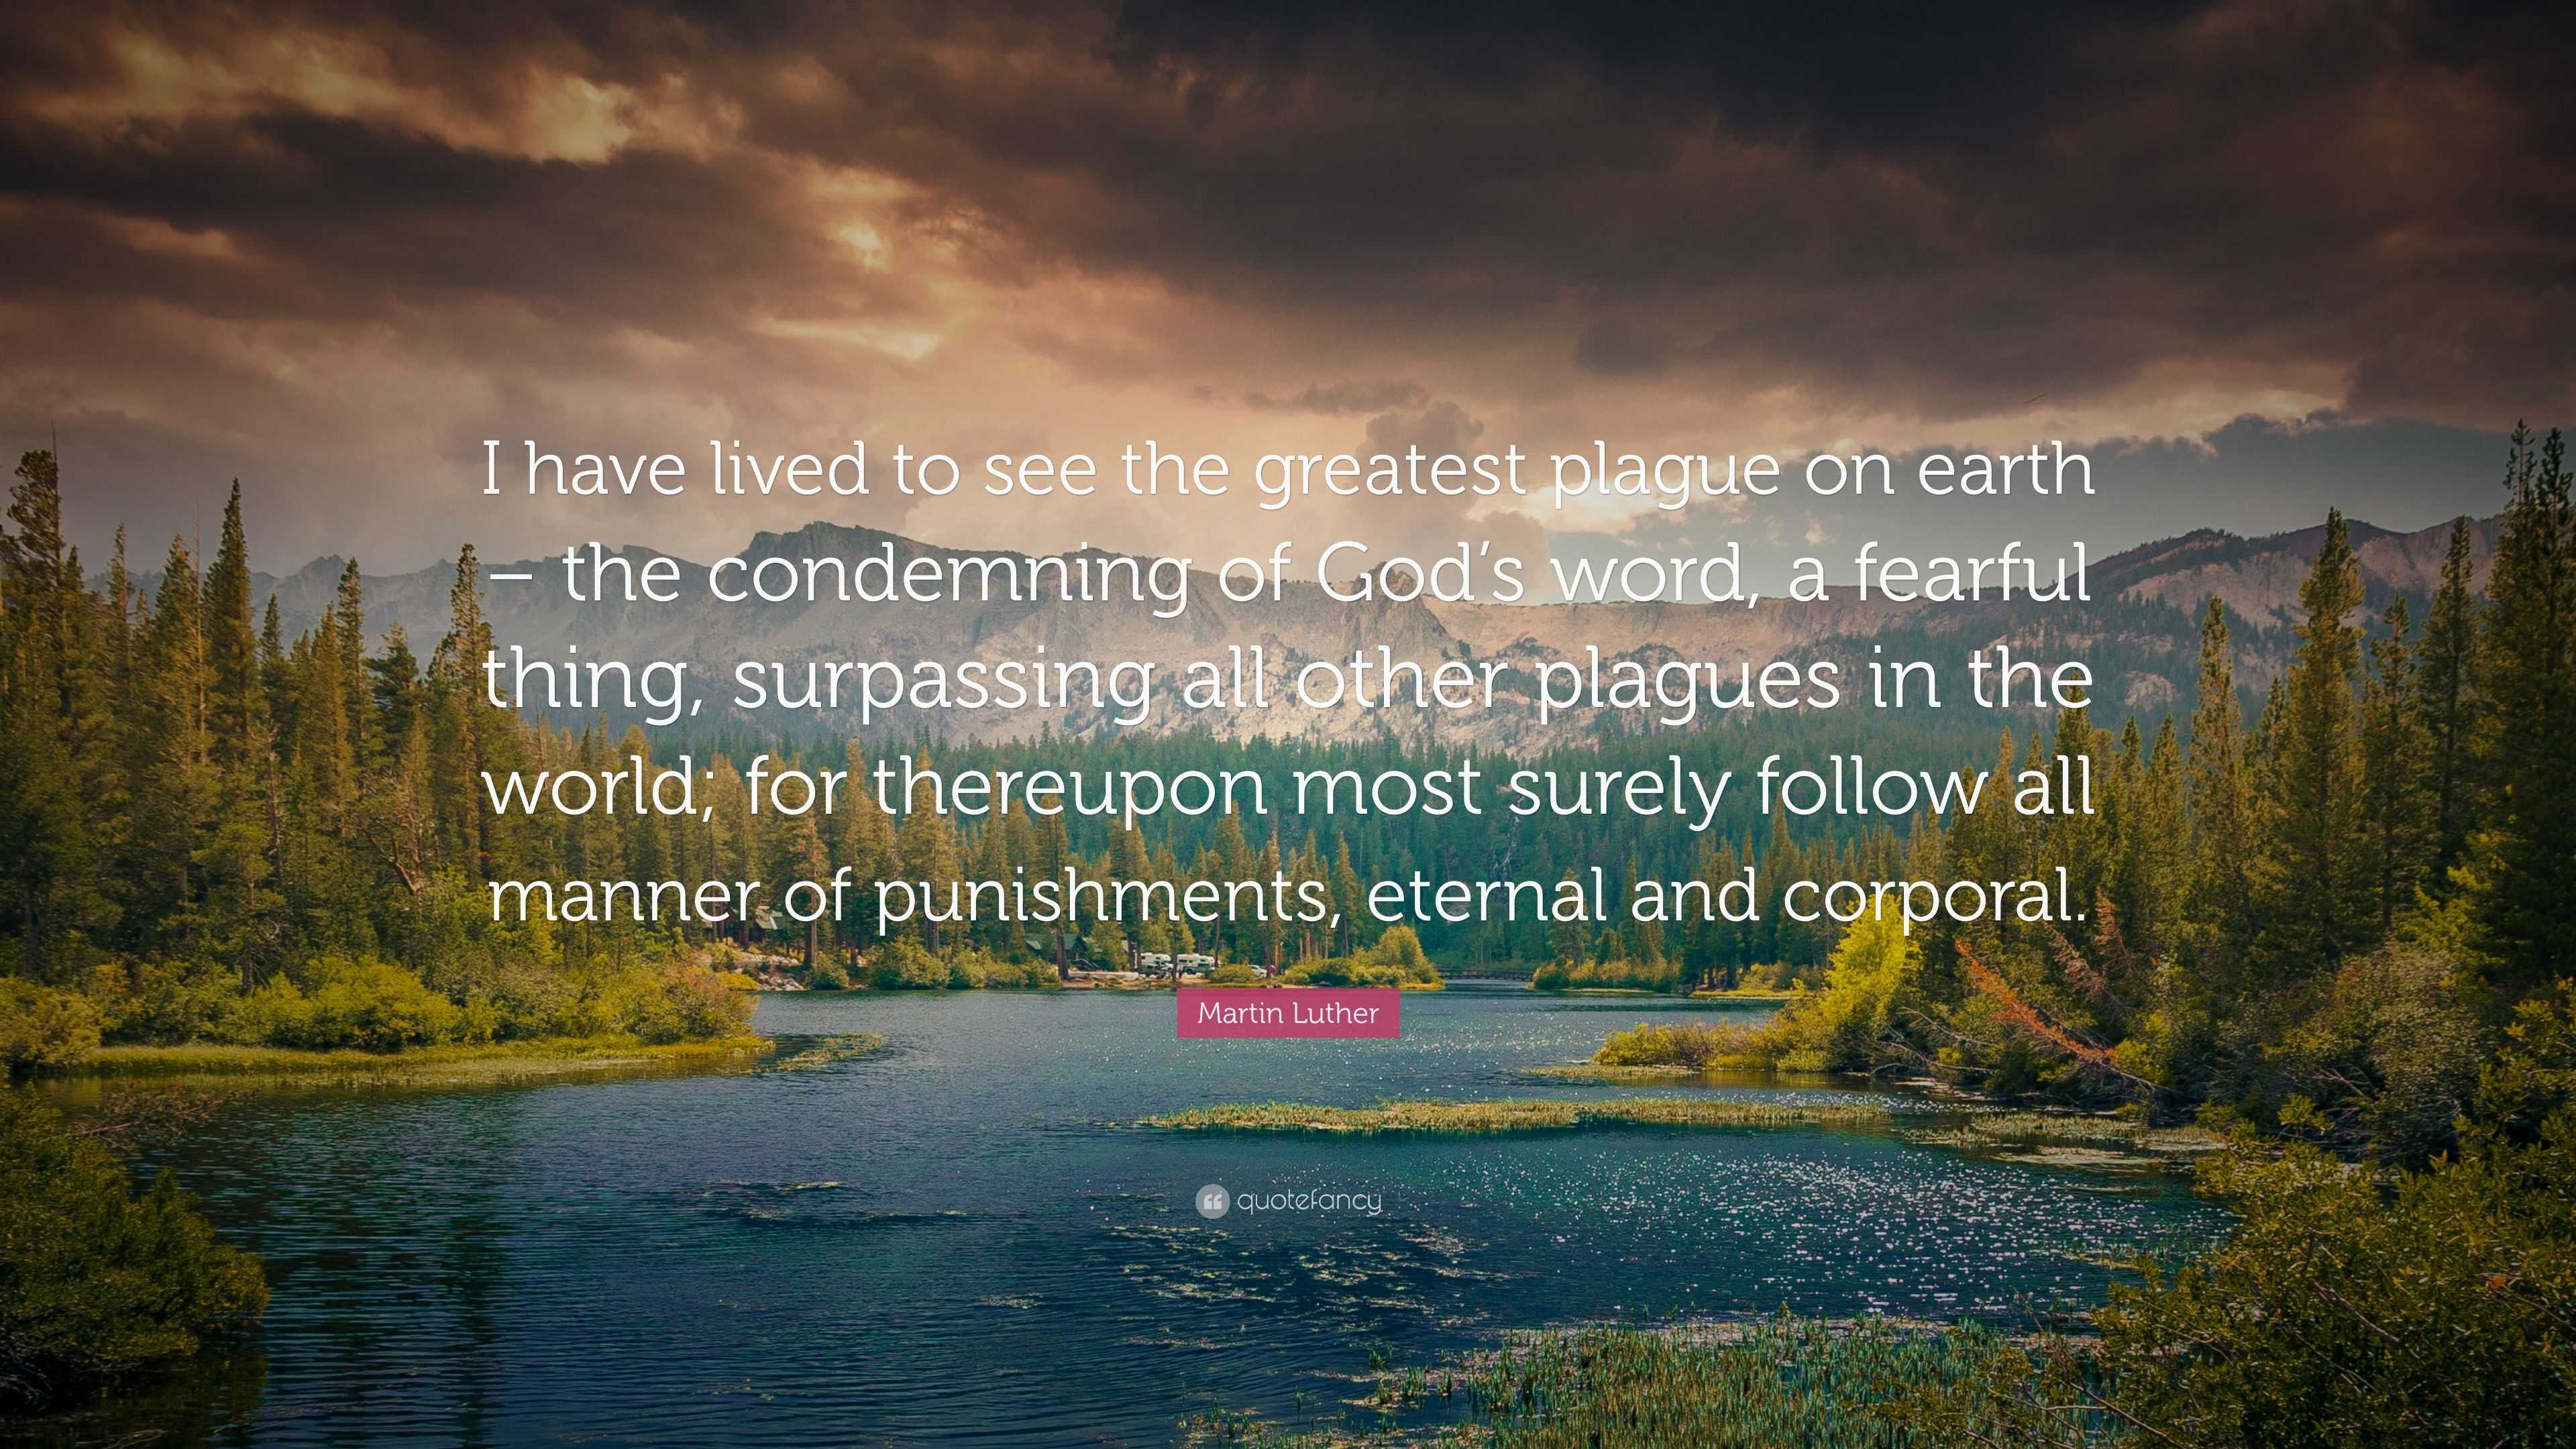 Martin Luther Quote: “I have lived to see the greatest plague on earth ...